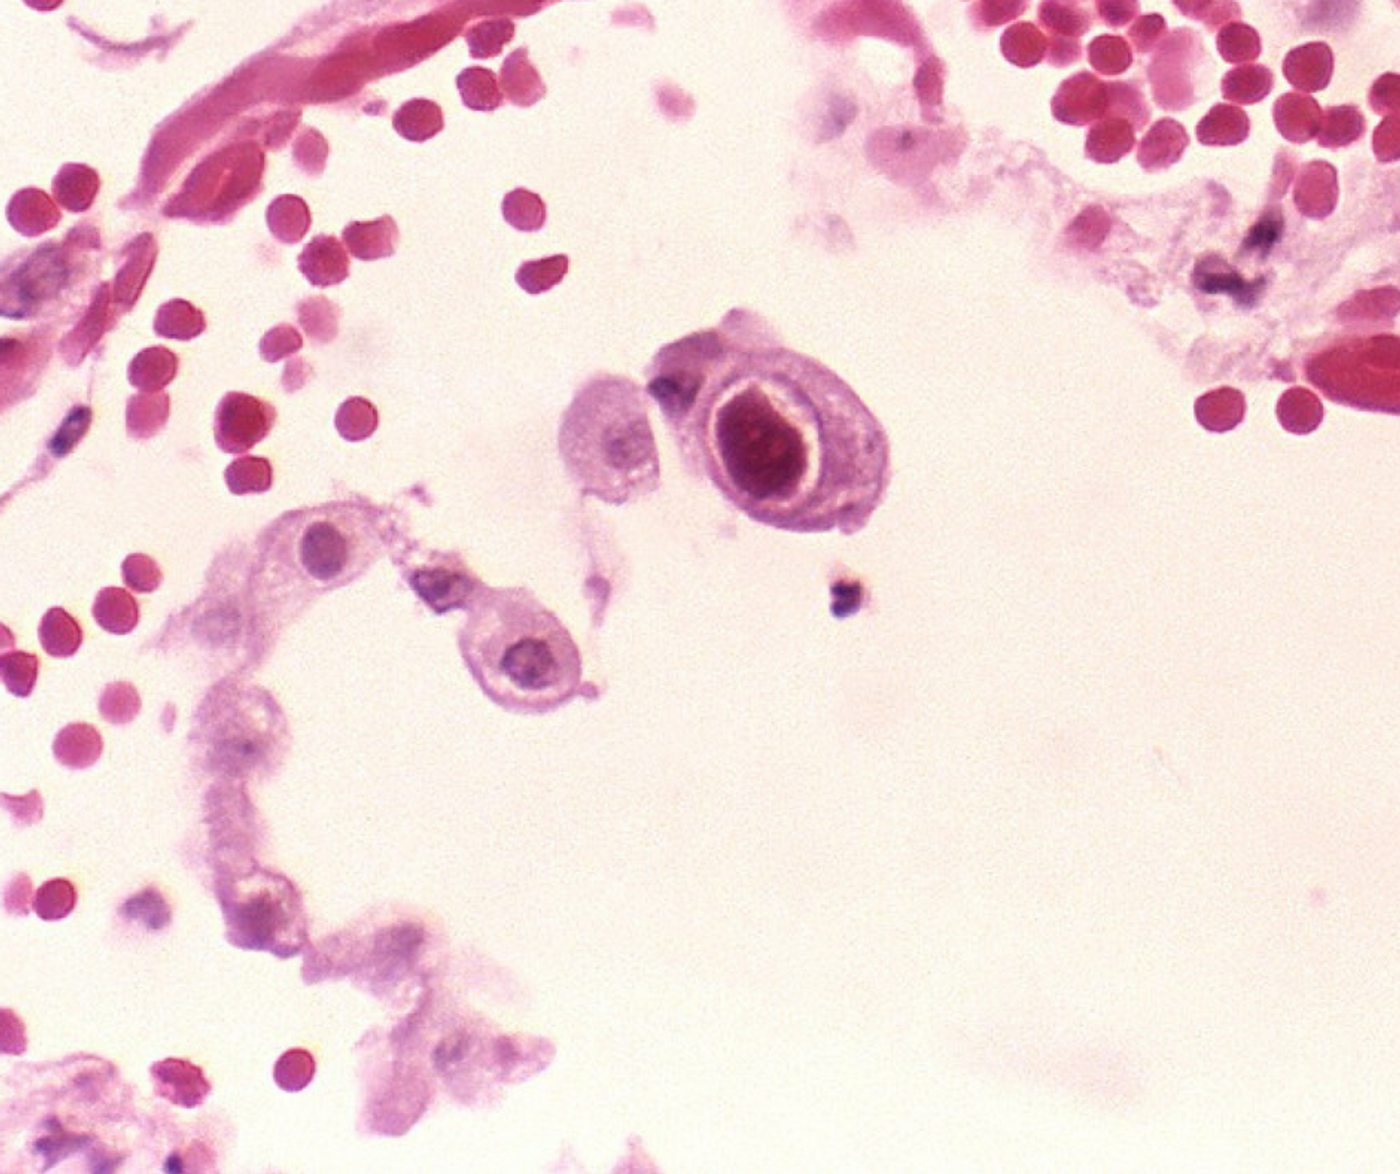 Cytomegalovirus infection of a lung cell. Credit: CDC Public Health Image Library